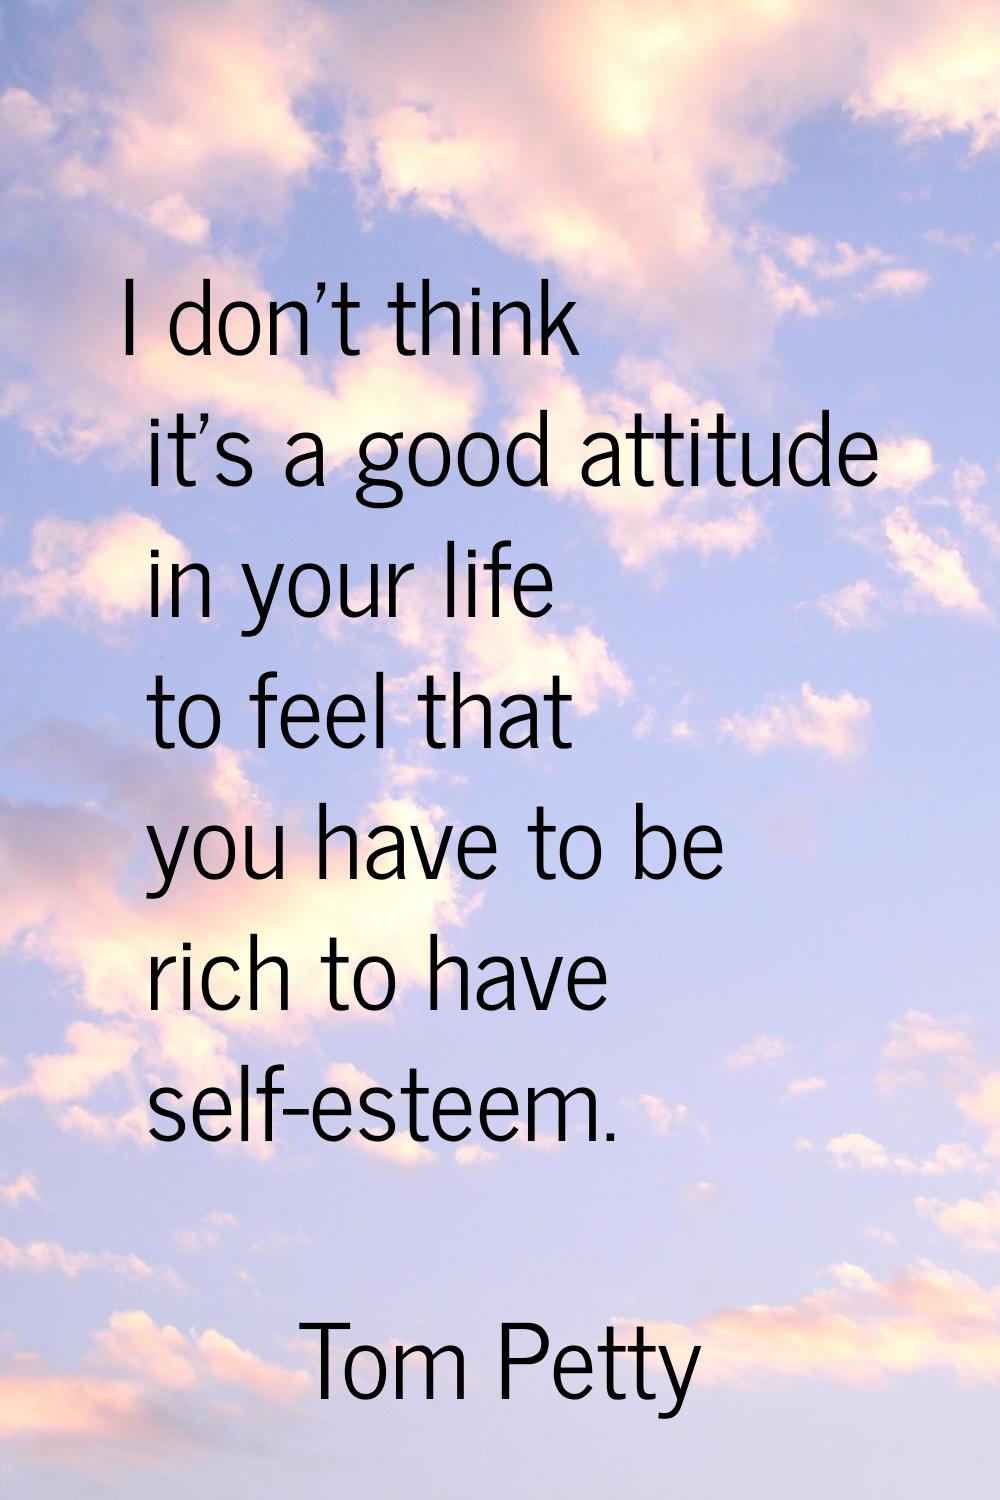 I don't think it's a good attitude in your life to feel that you have to be rich to have self-estee